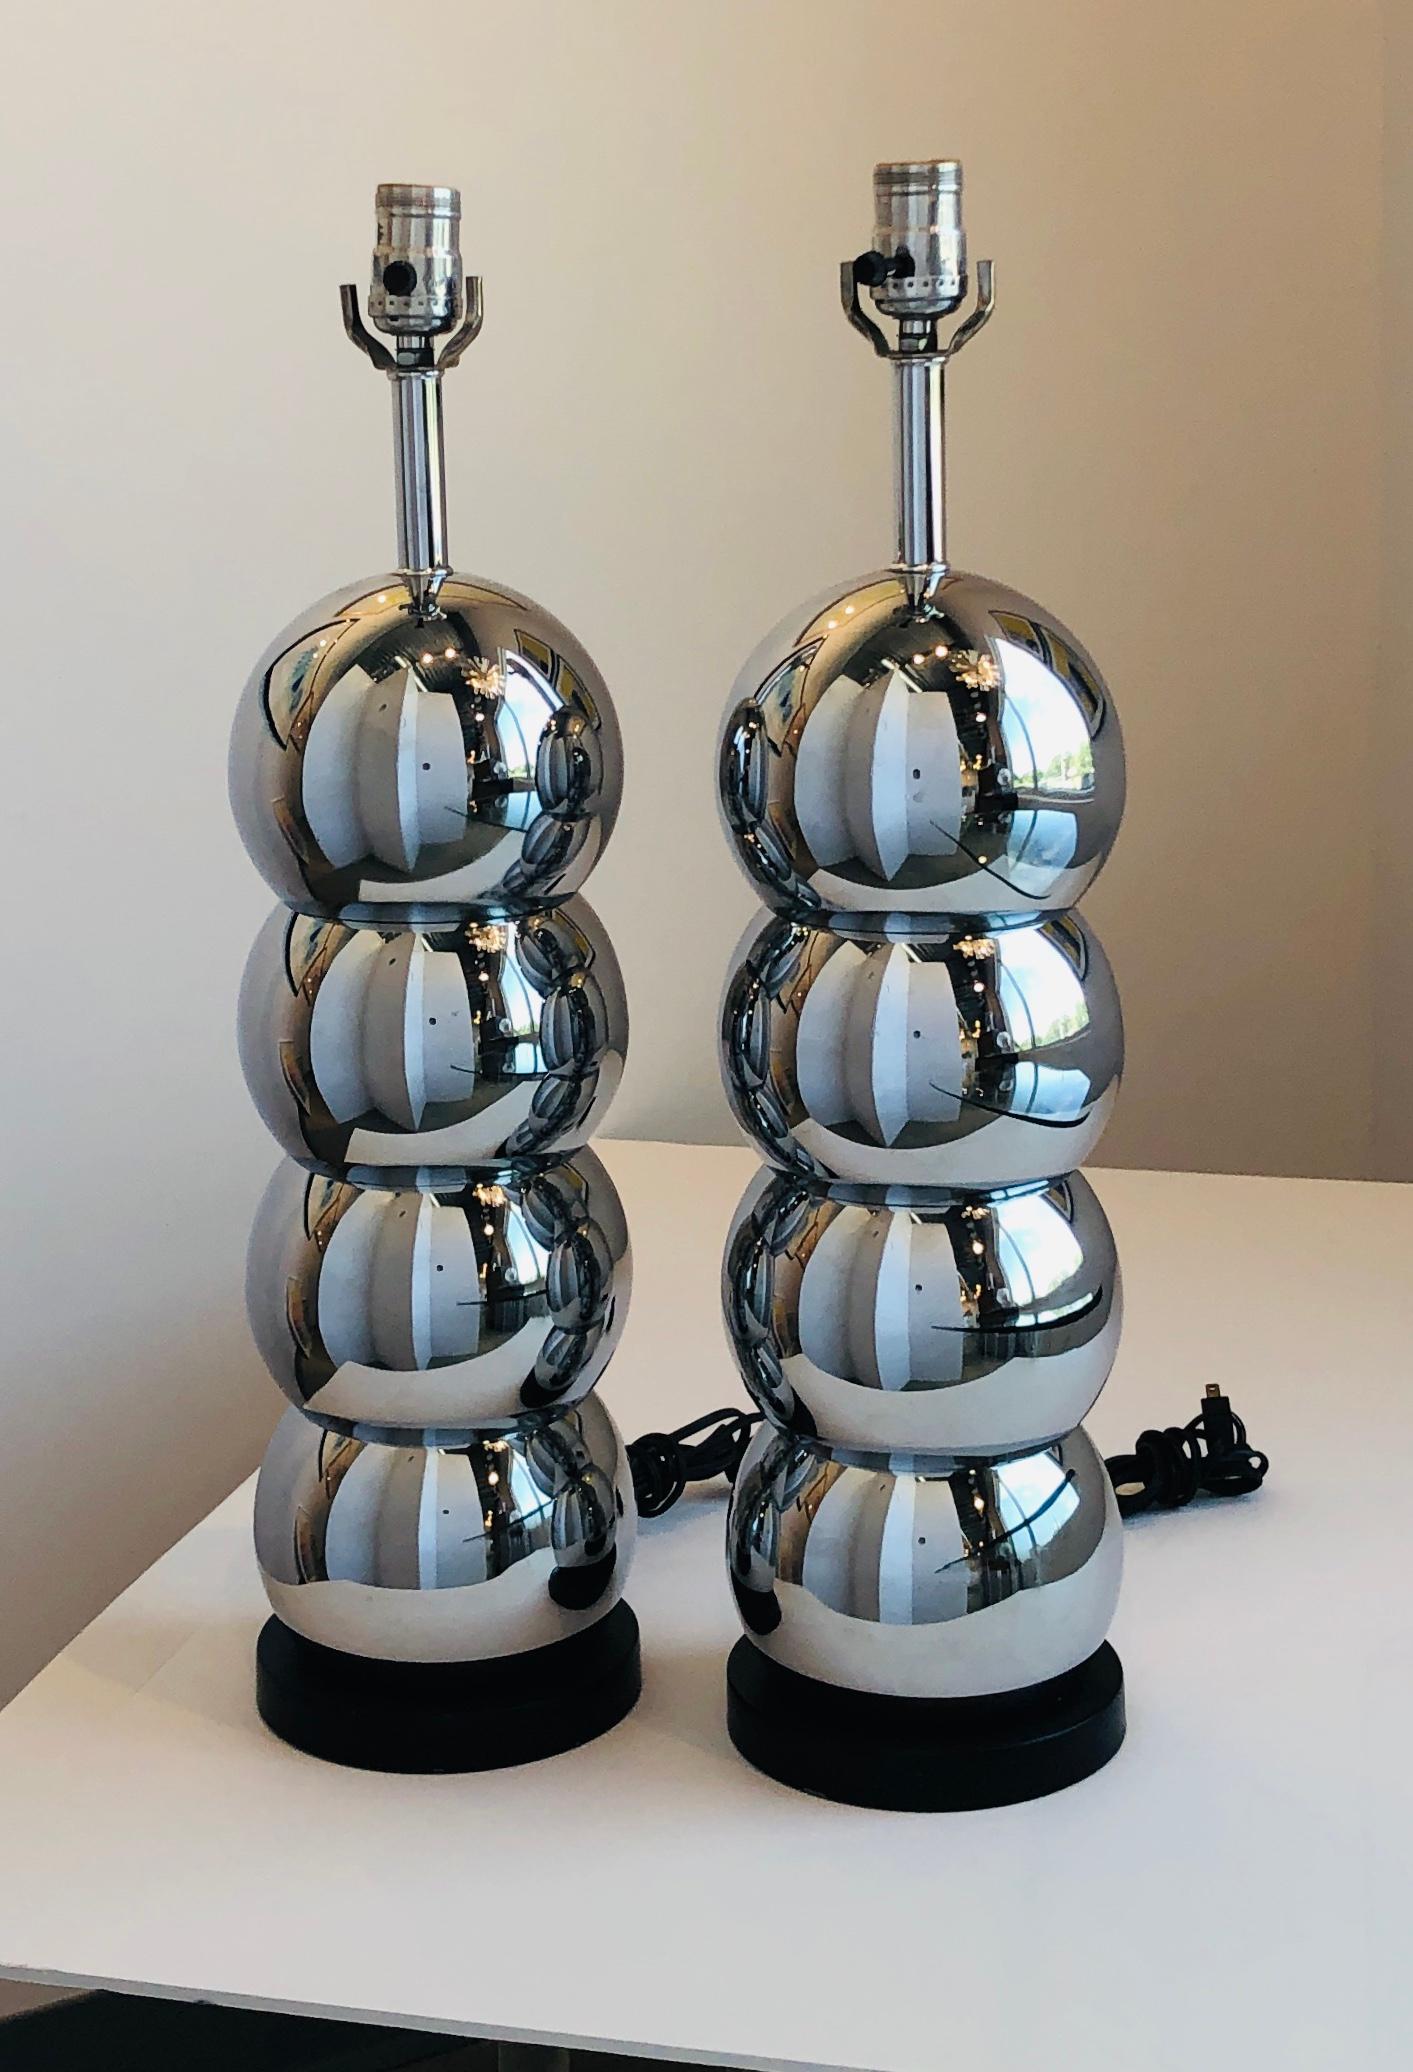 Offered is a pair of Mid-Century Modern stacking chrome plated ball and black wood base table lamps by George Kovaks. We have added the Lucite base, Lucite finial and black shades (shades and bulbs are not included.) This George Kovacs design was